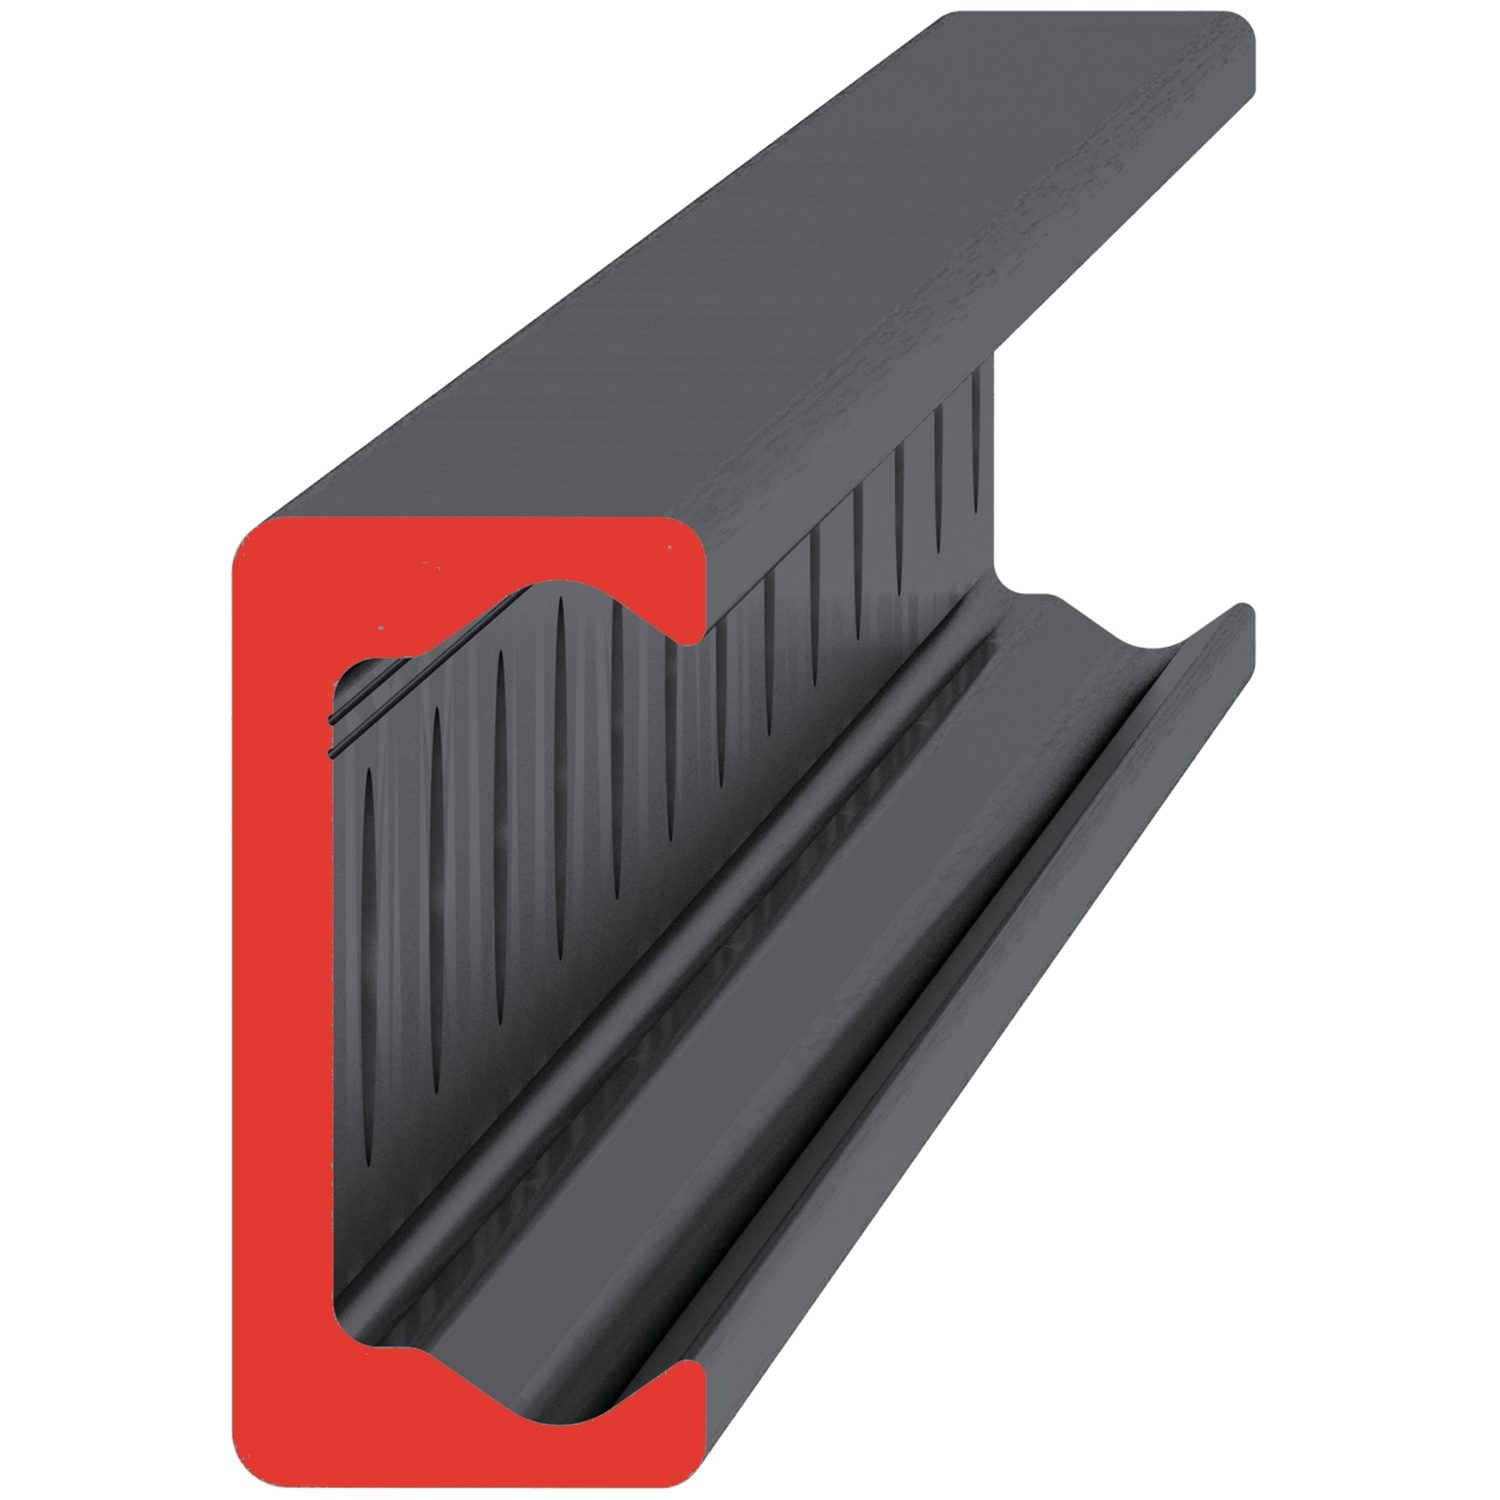 Easy to Install Rails Medium duty guides made of carbon steel with induction-hardened steel raceways. Counterbored. For use with L1935.CS sliders. See our compact rail technical page for more details. Excellent for applications such as sliding seats, doors etc.